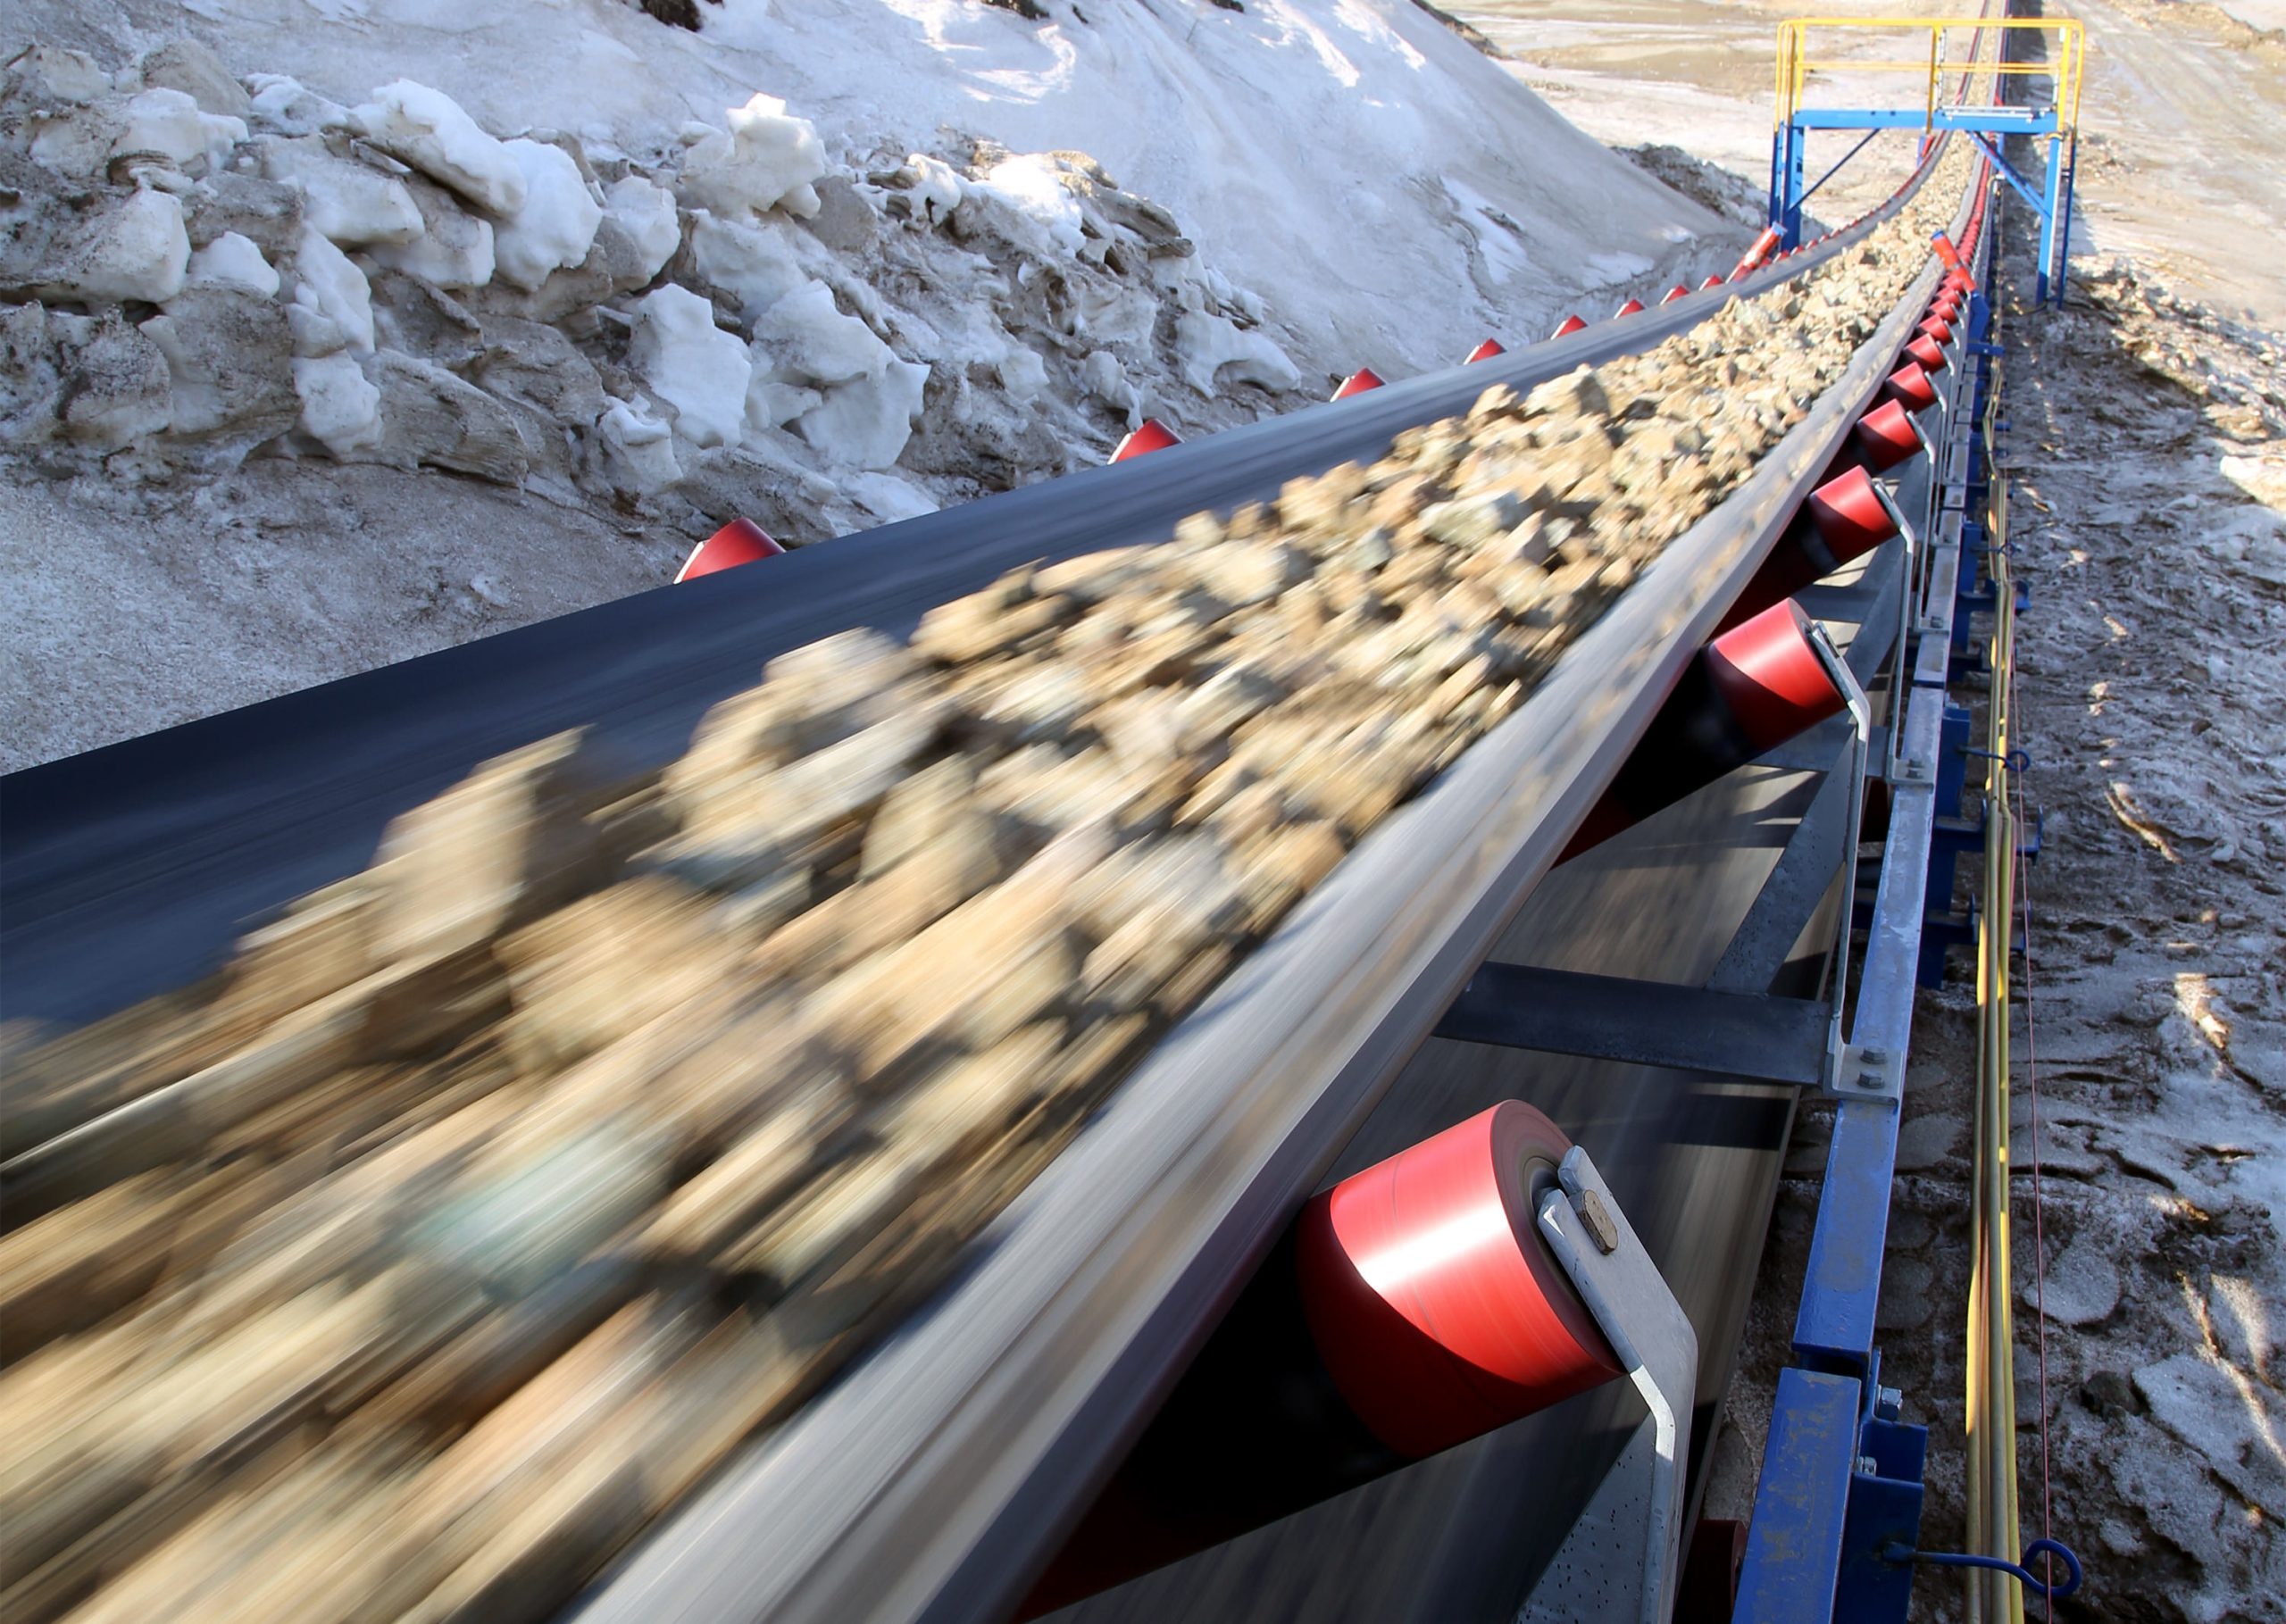 Conveyor,Belt,Moves,Ore,From,The,Quarry,For,Processing.,Blurred